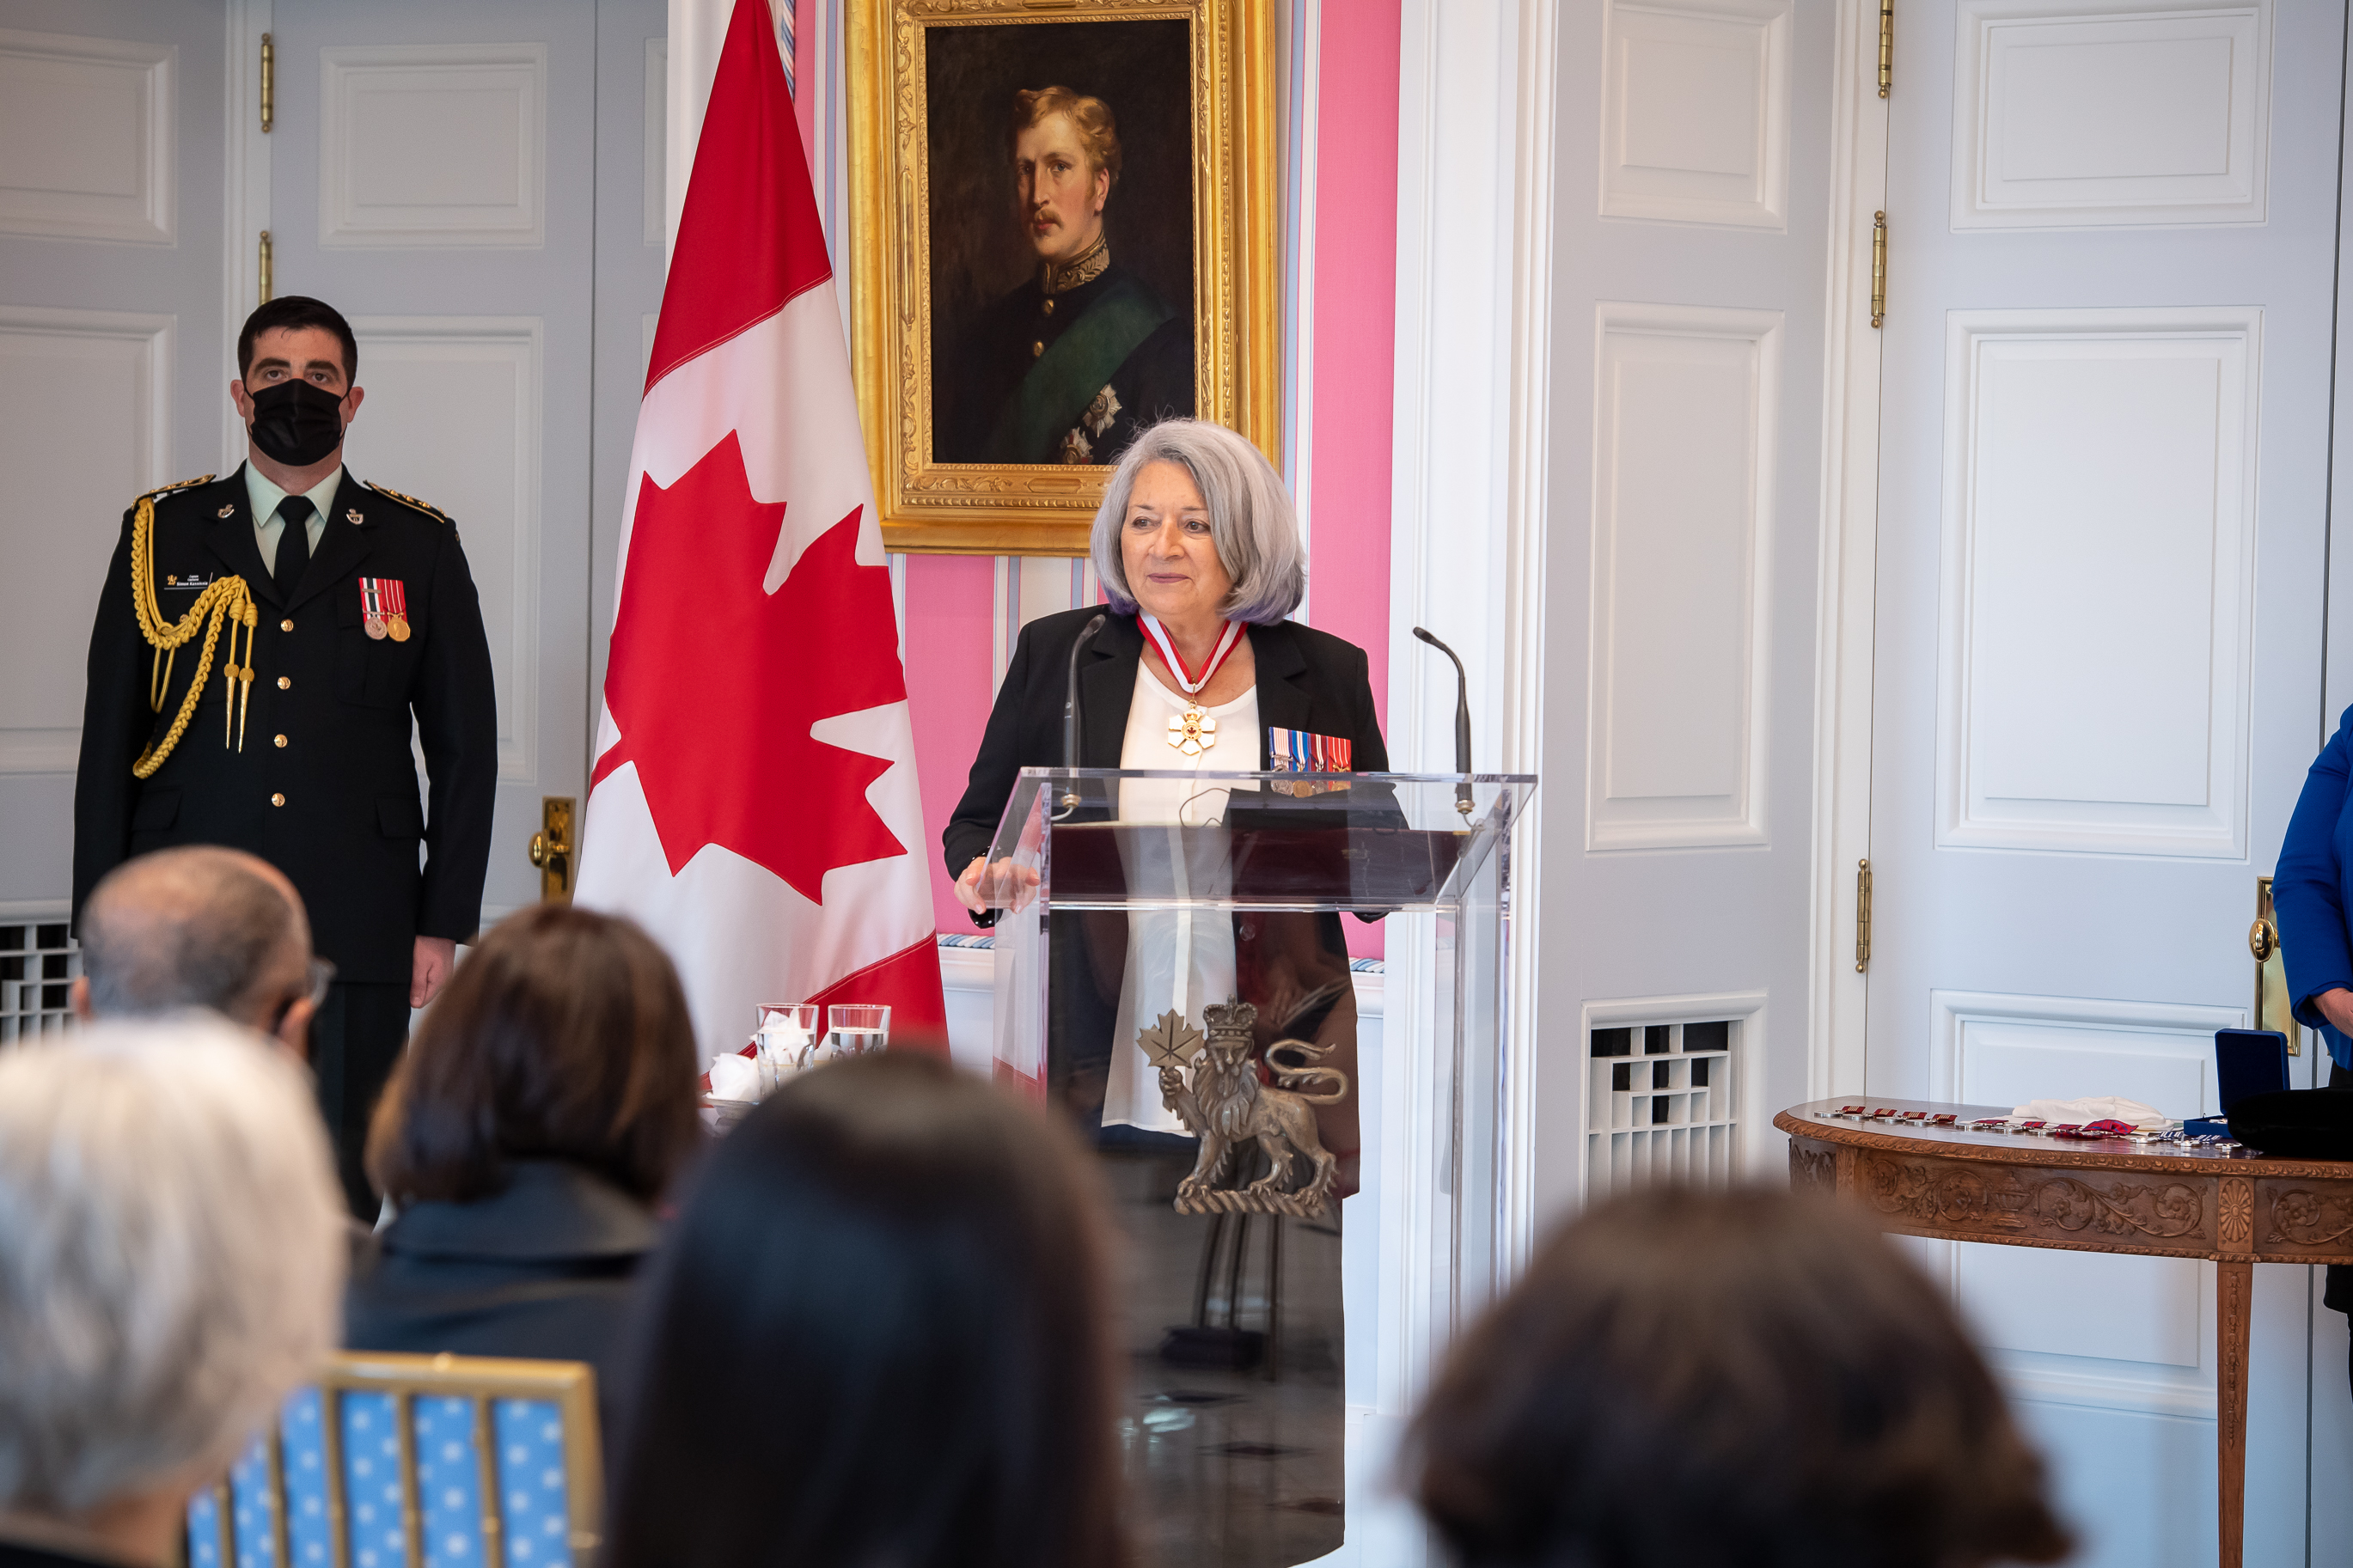 Governor General honoured remarkable Canadians at Rideau Hall